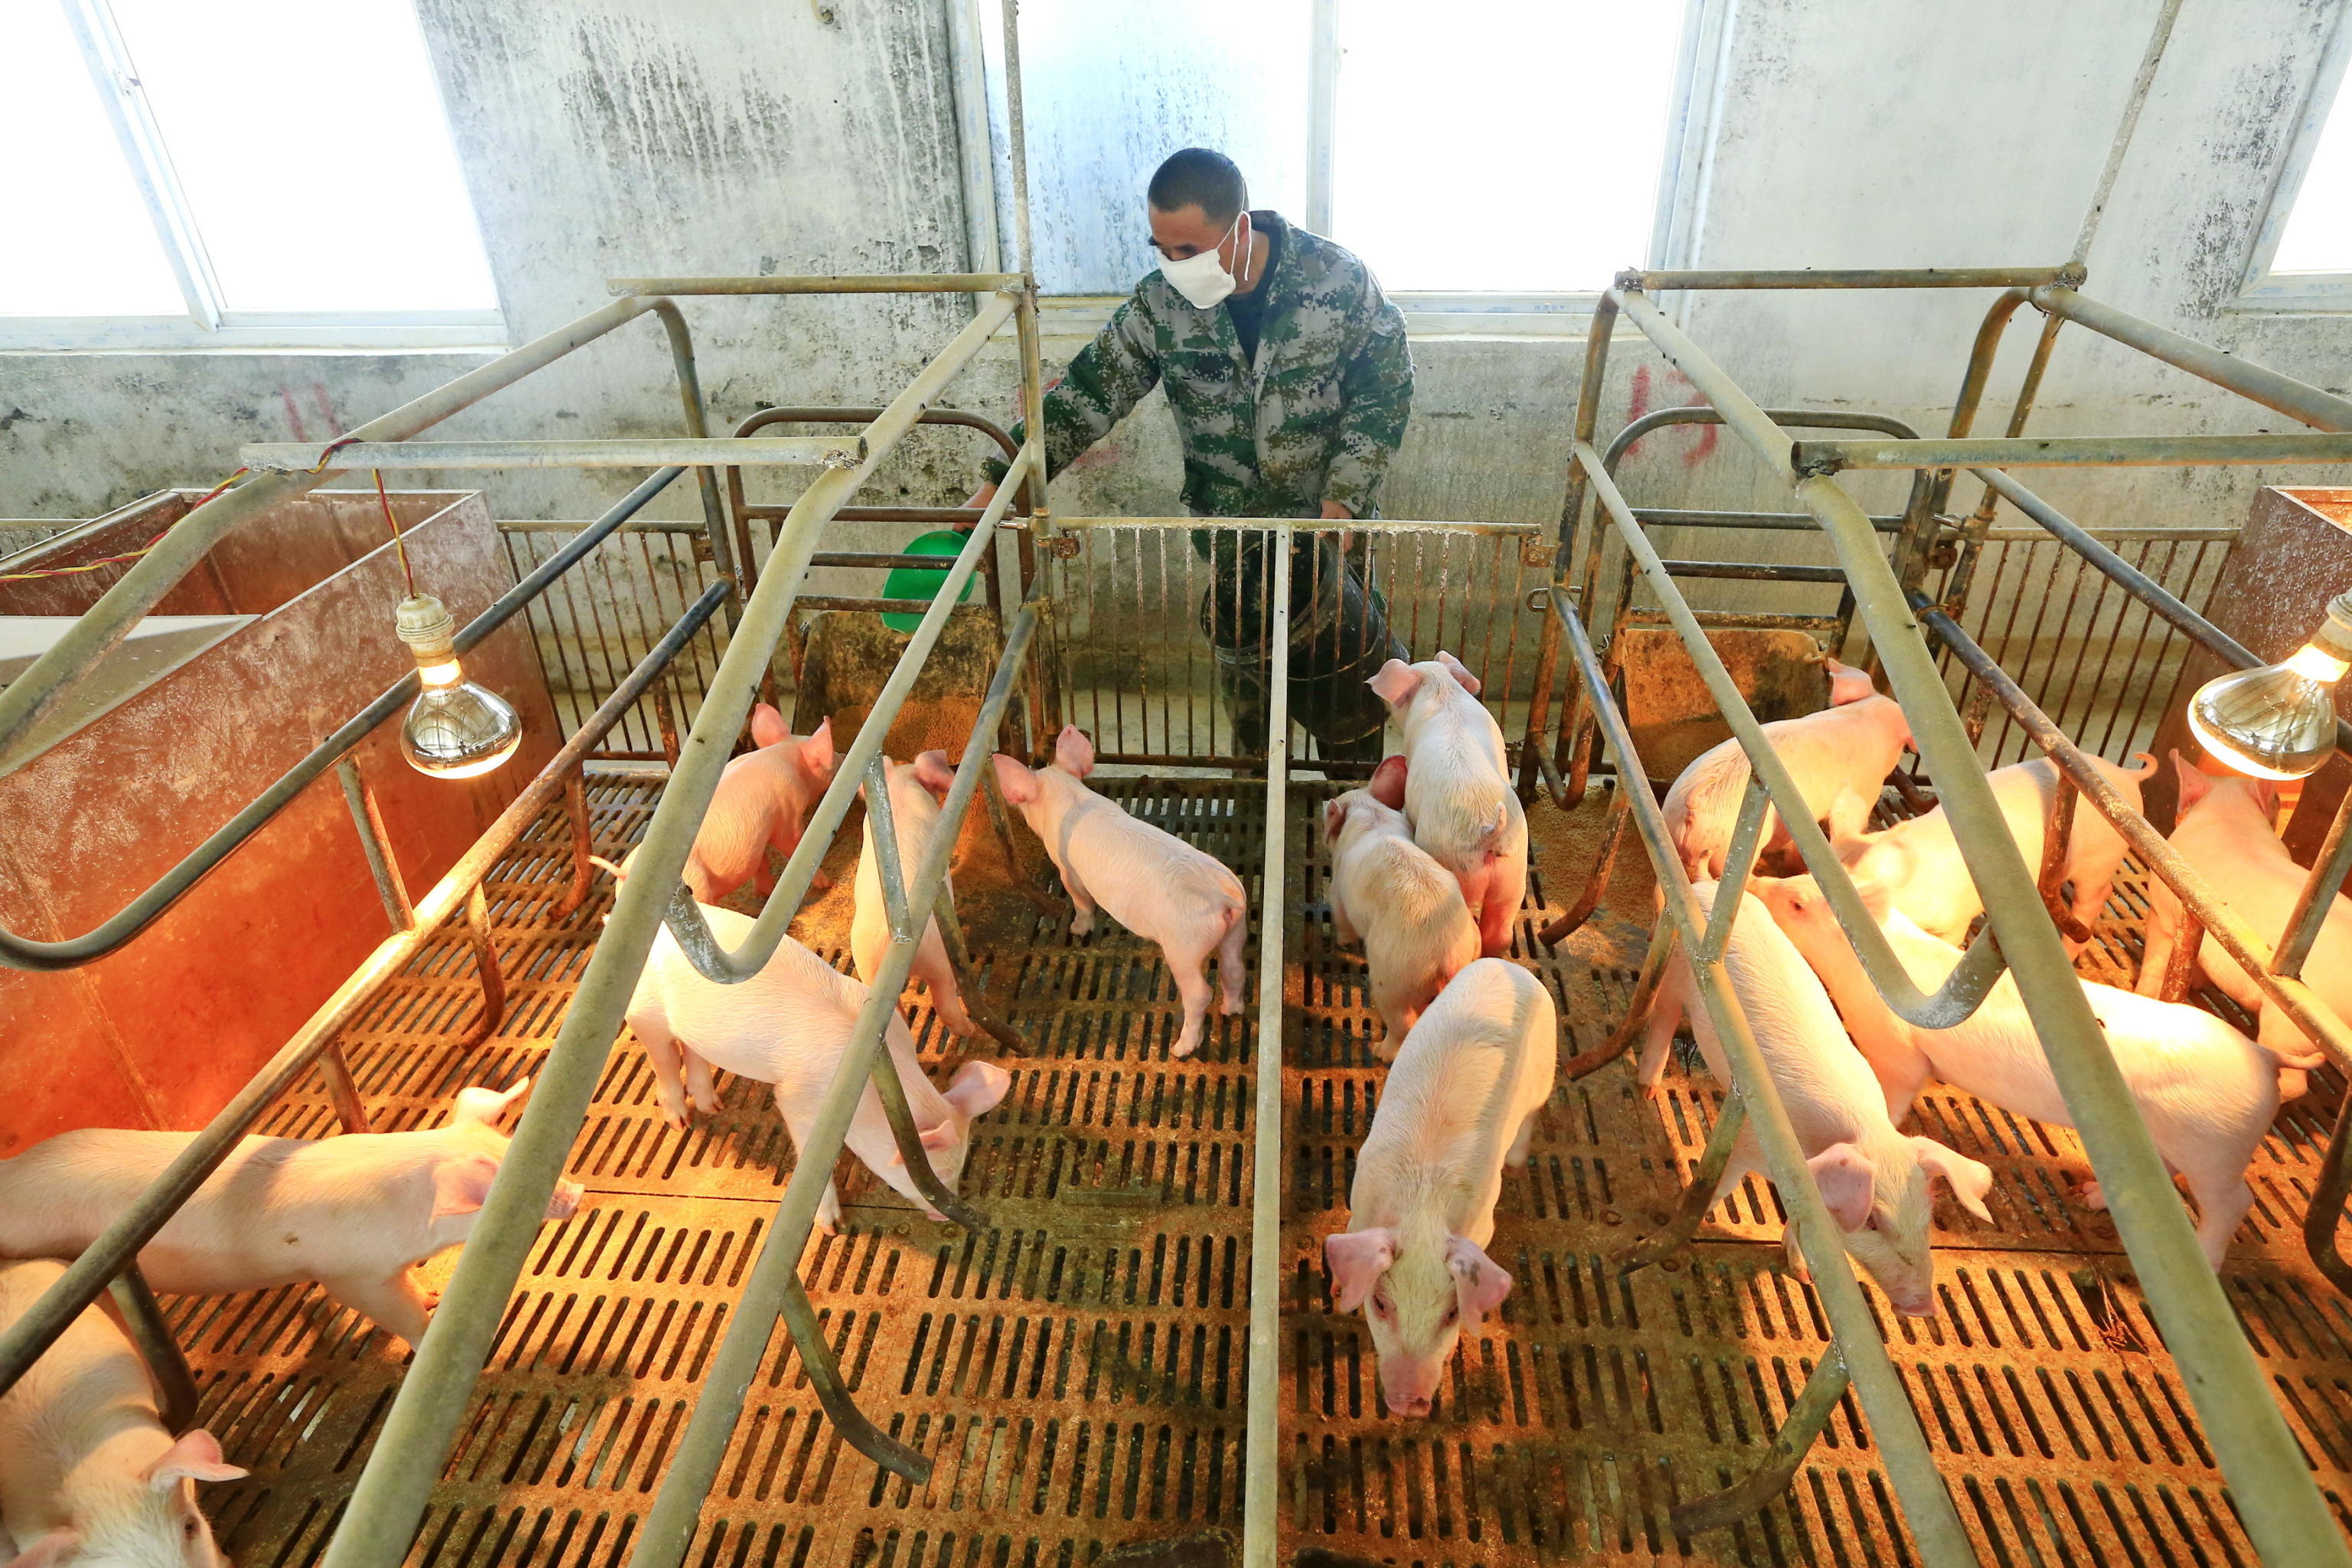 epa08517186 (FILE) - A worker feeds the piglets in a hog pen in Suining, Sichuan province, China, 21 February 2020 (reissued 30 June 2020). Chinese scientists have discovered a new type of swine flu that could trigger a pandemic, according to media reports. The G4 virus allegedly has the potential to infect humans, researchers from several Chinese universities and the Chinese Center for Disease Control and Prevention wrote in an article. The G4 is derived from the H1N1 virus, which caused a pandemic in 2009.  EPA/ZHONG MIN CHINA OUT *** Local Caption *** 55893553